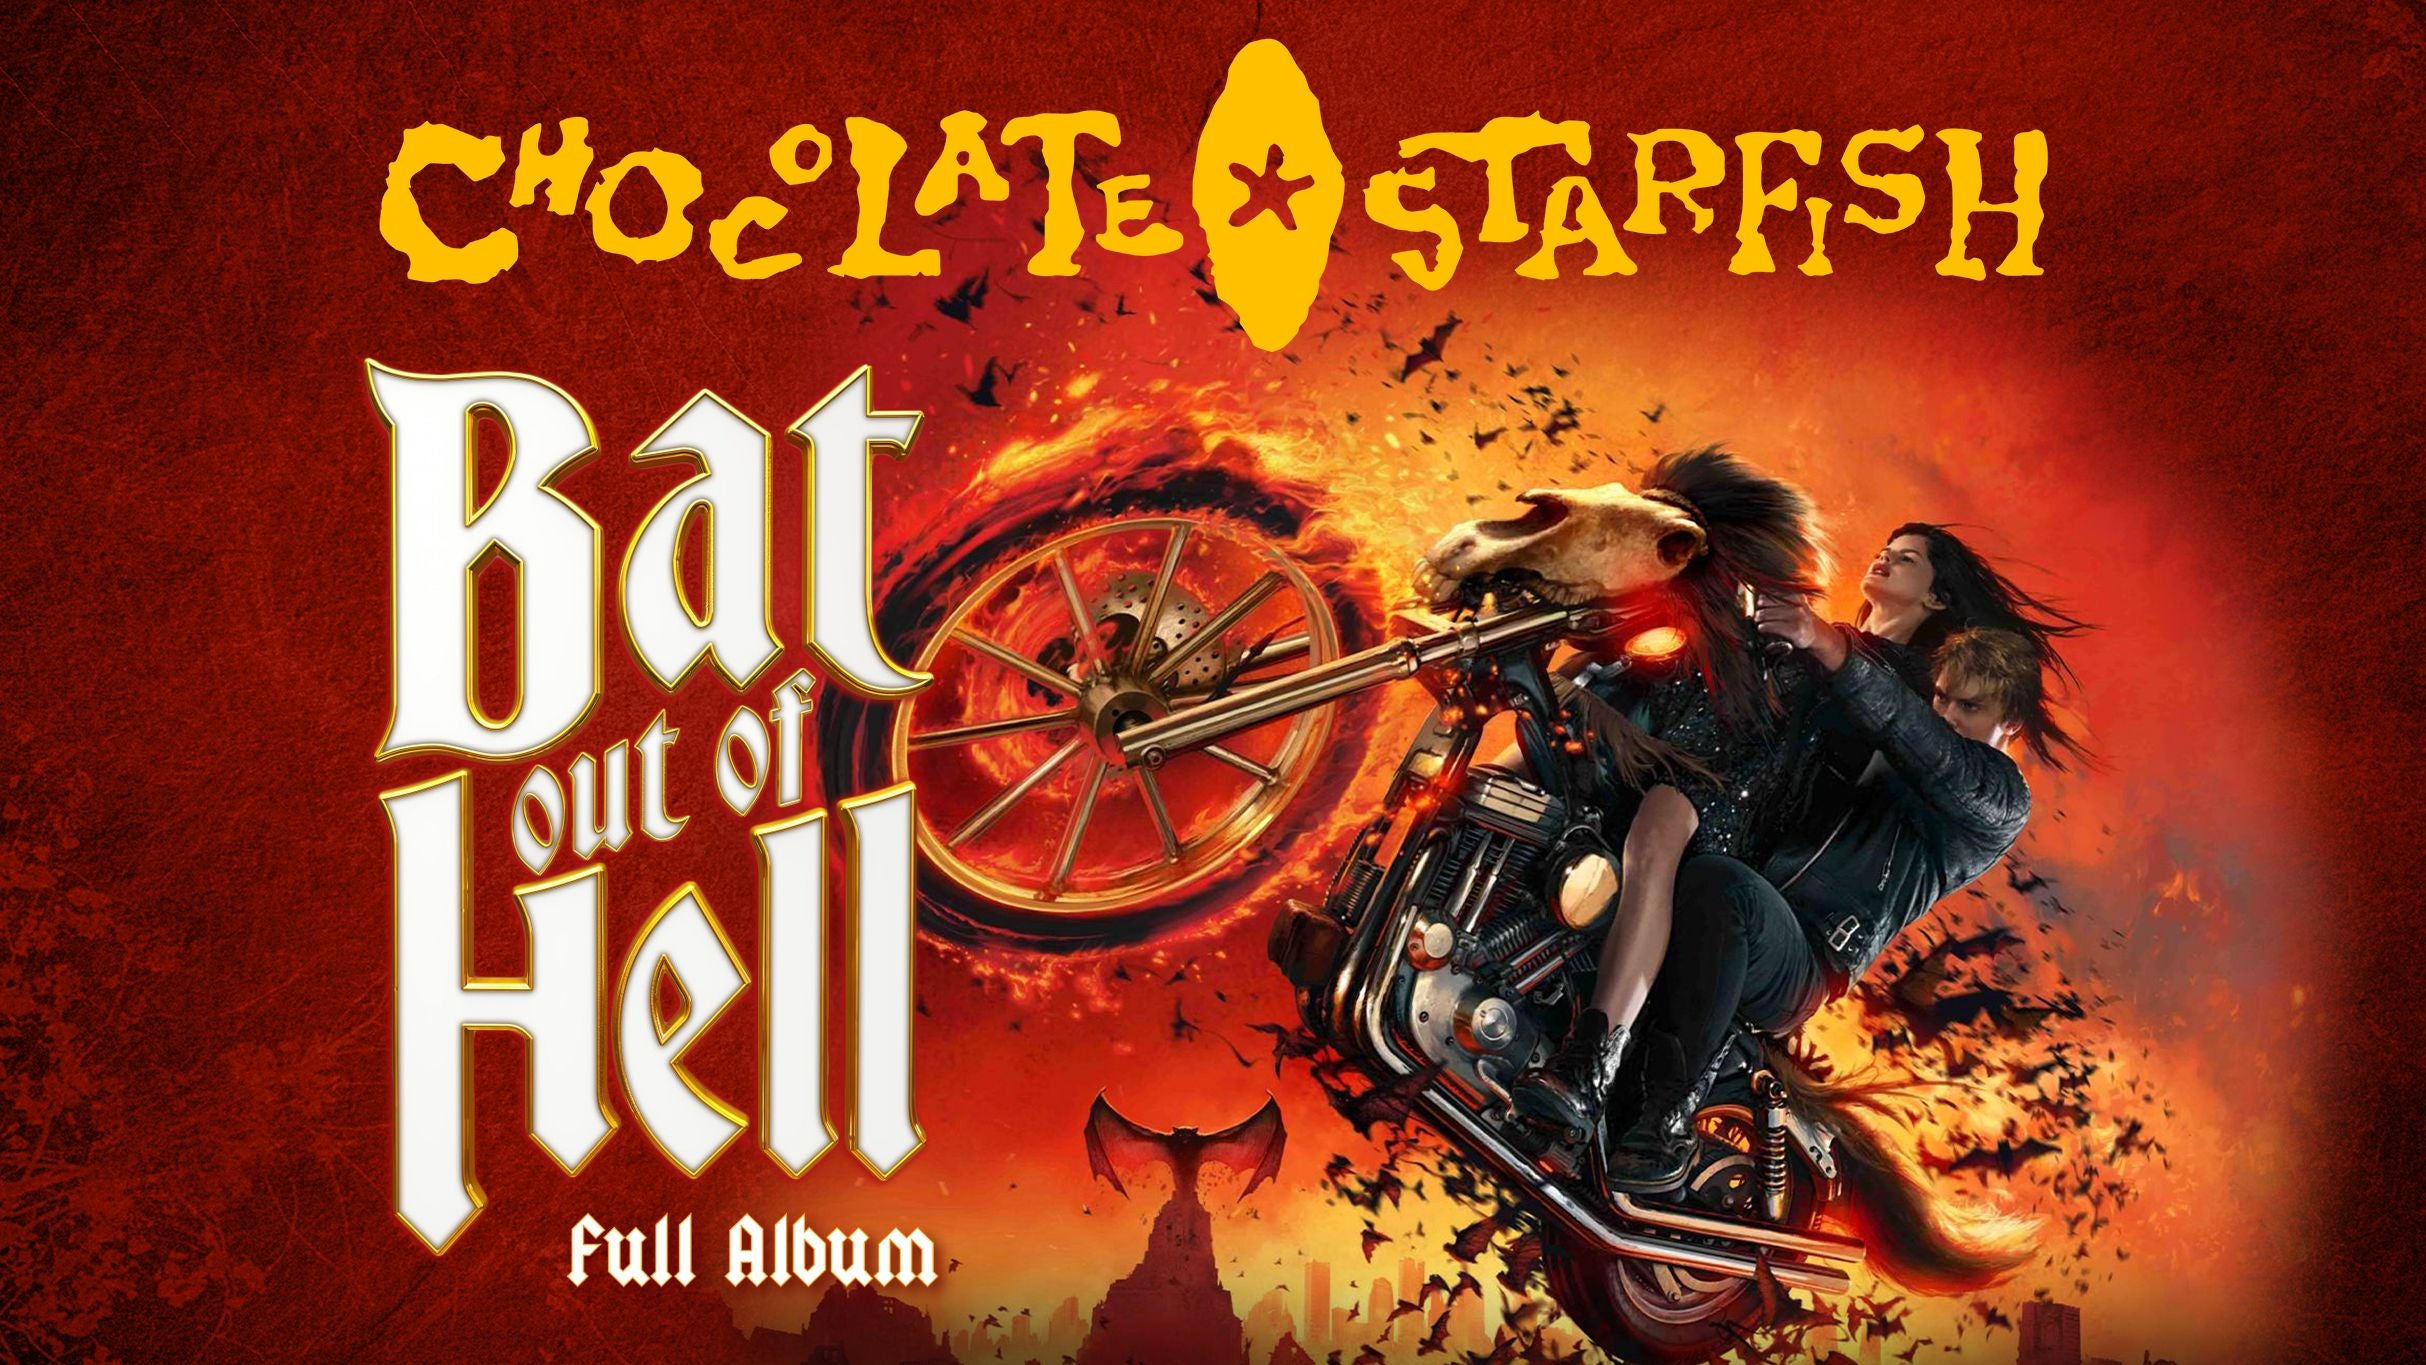 Image used with permission from Ticketmaster | Chocolate Starfish Present Bat Out of Hell tickets